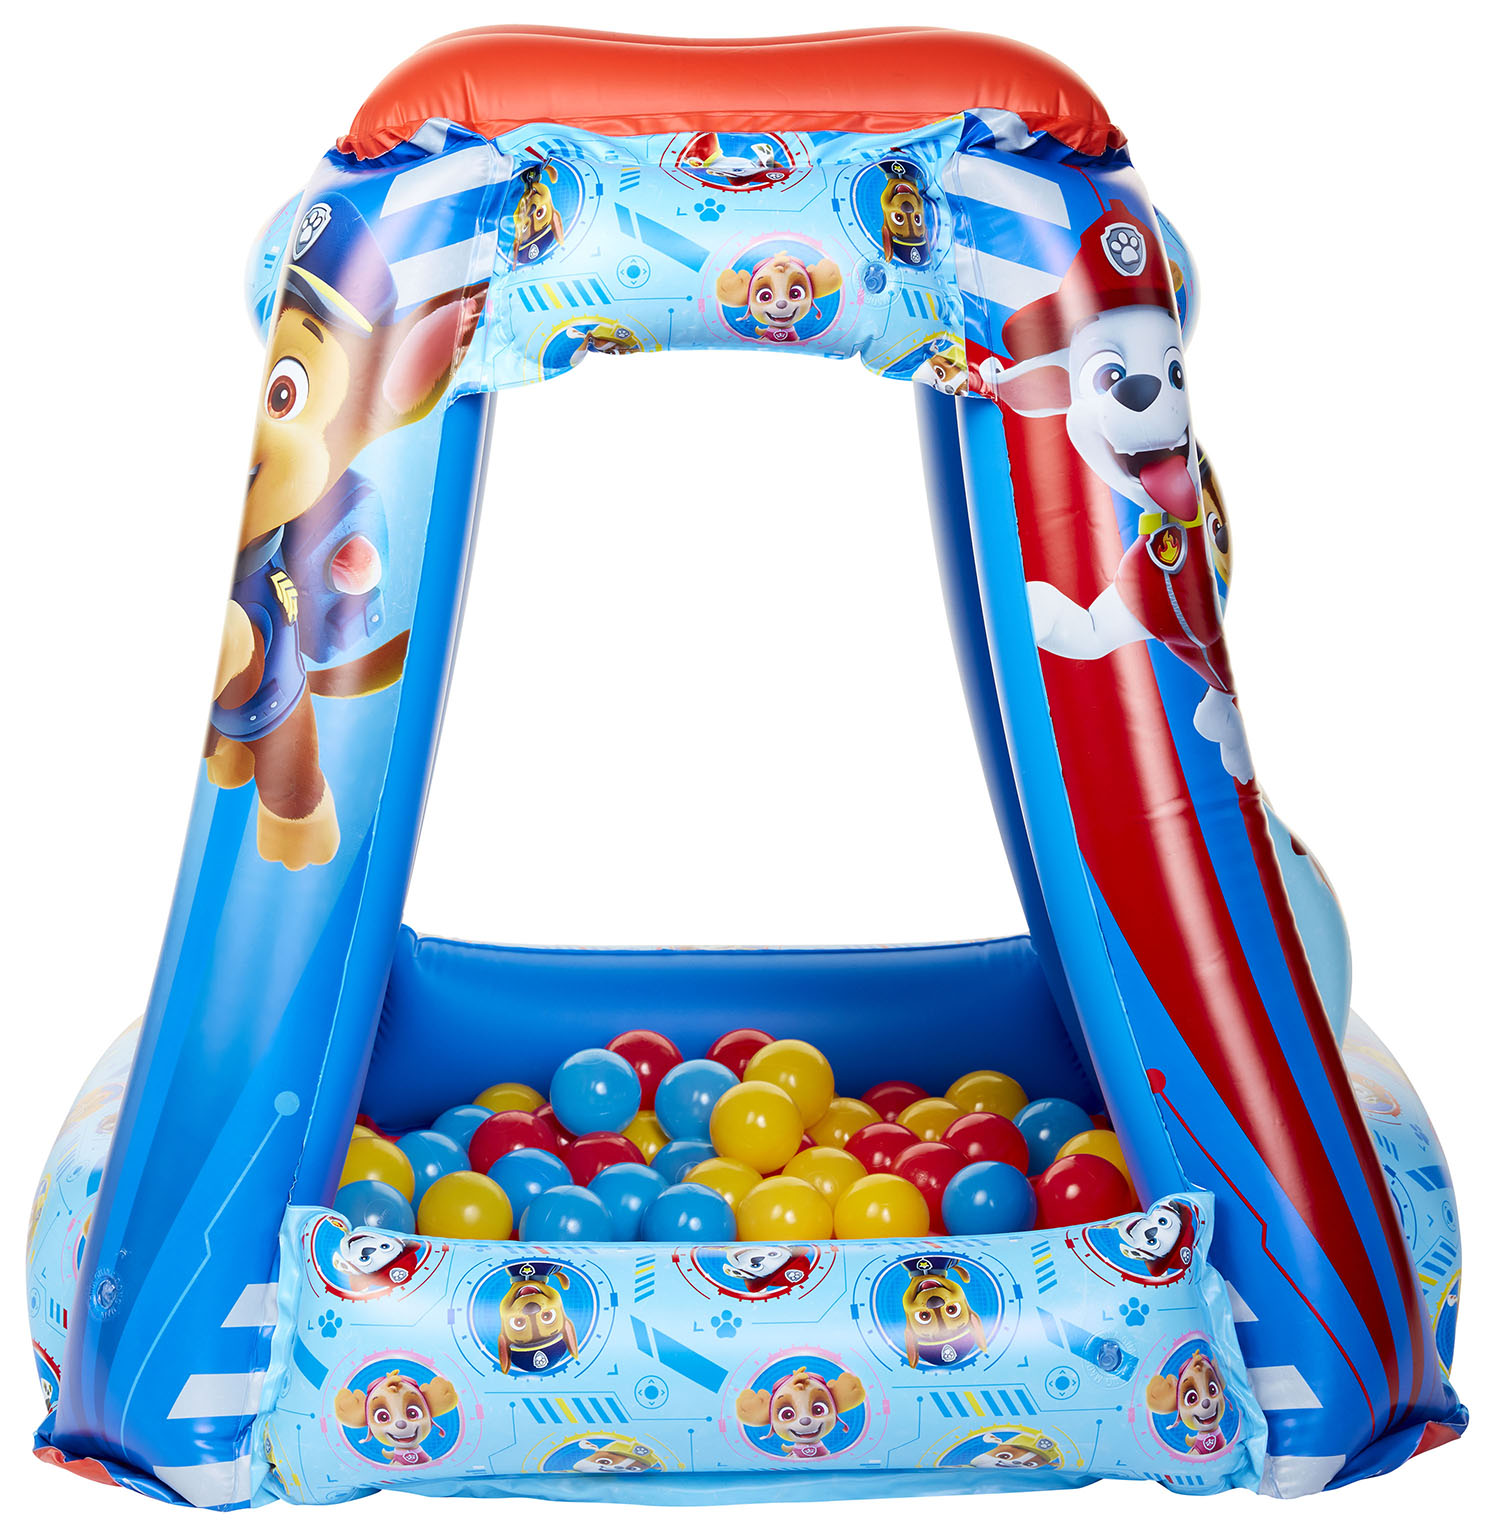 Paw Patrol Inflatable Playland Ball Pit with 20 Soft Flex Balls - image 4 of 5